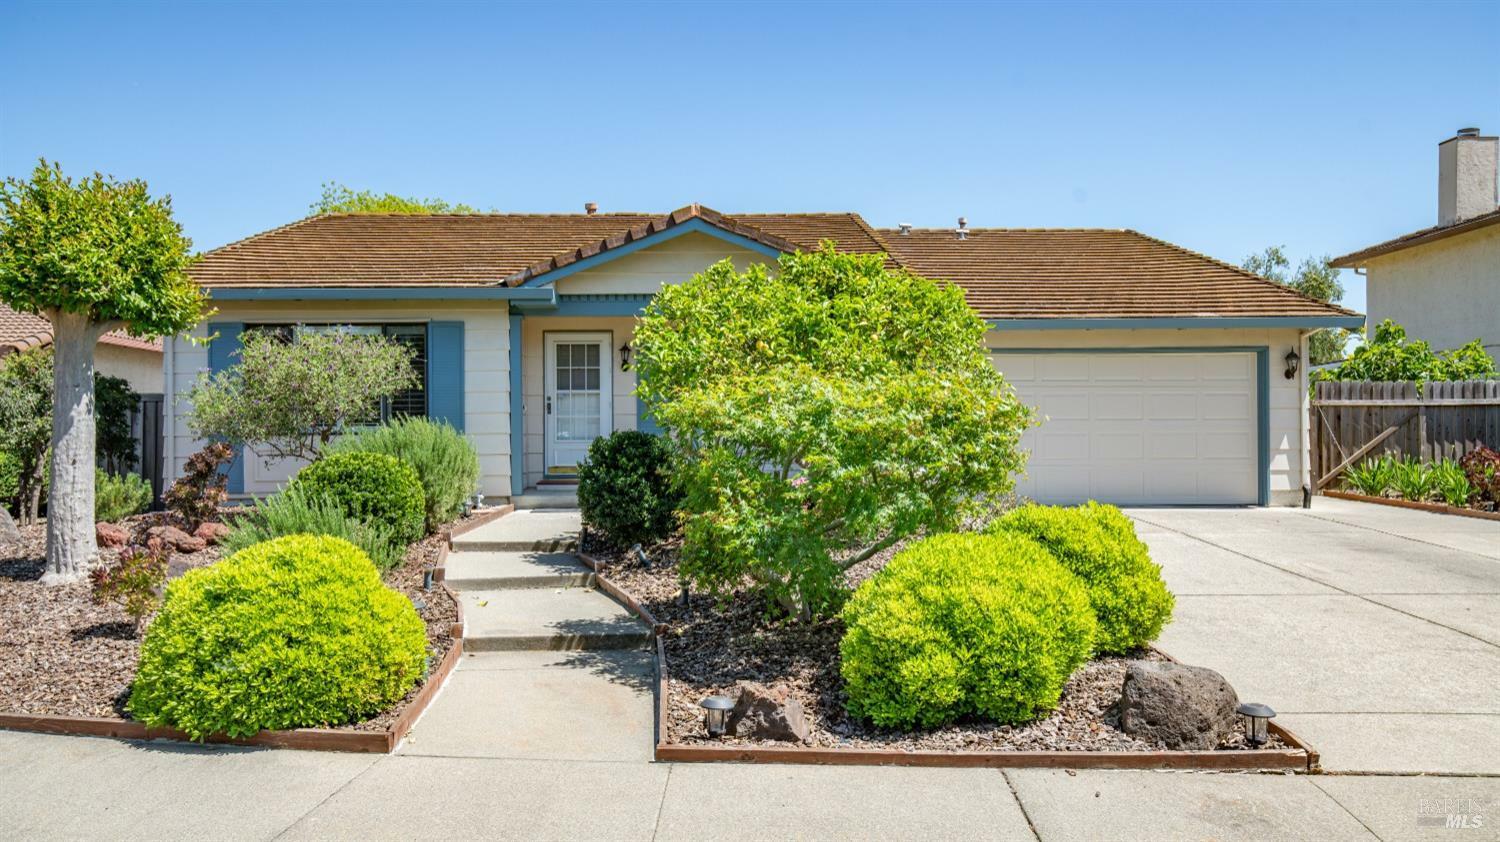 Property Photo:  3140 Clydesdale Way  CA 94533 